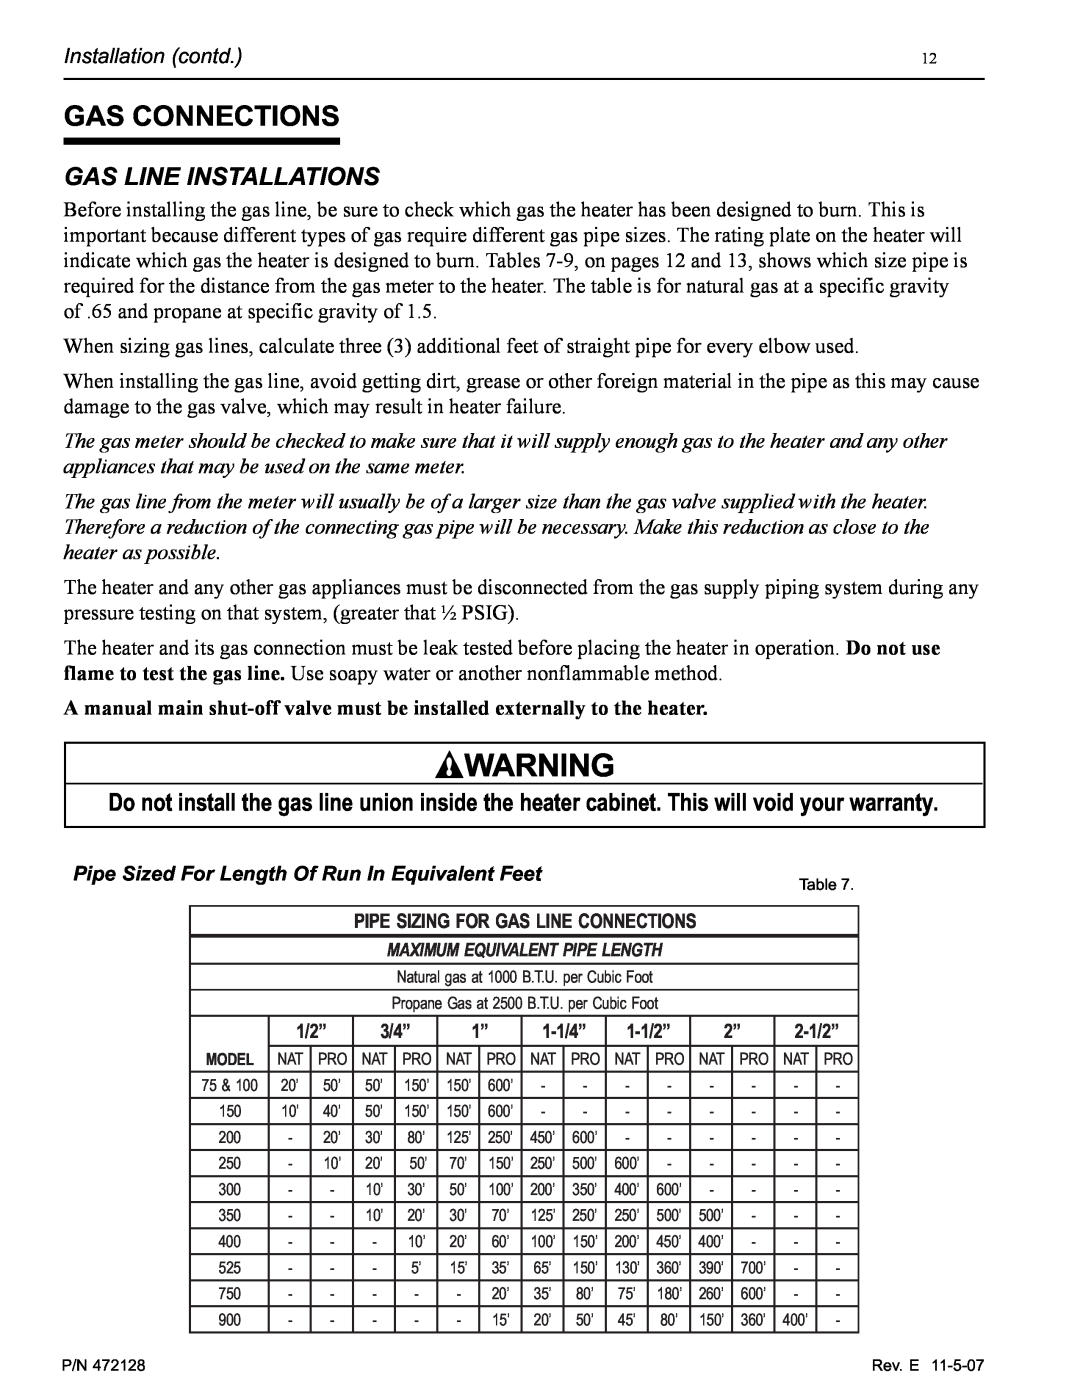 Pentair Hot Tub manual Gas Connections, Gas Line Installations 